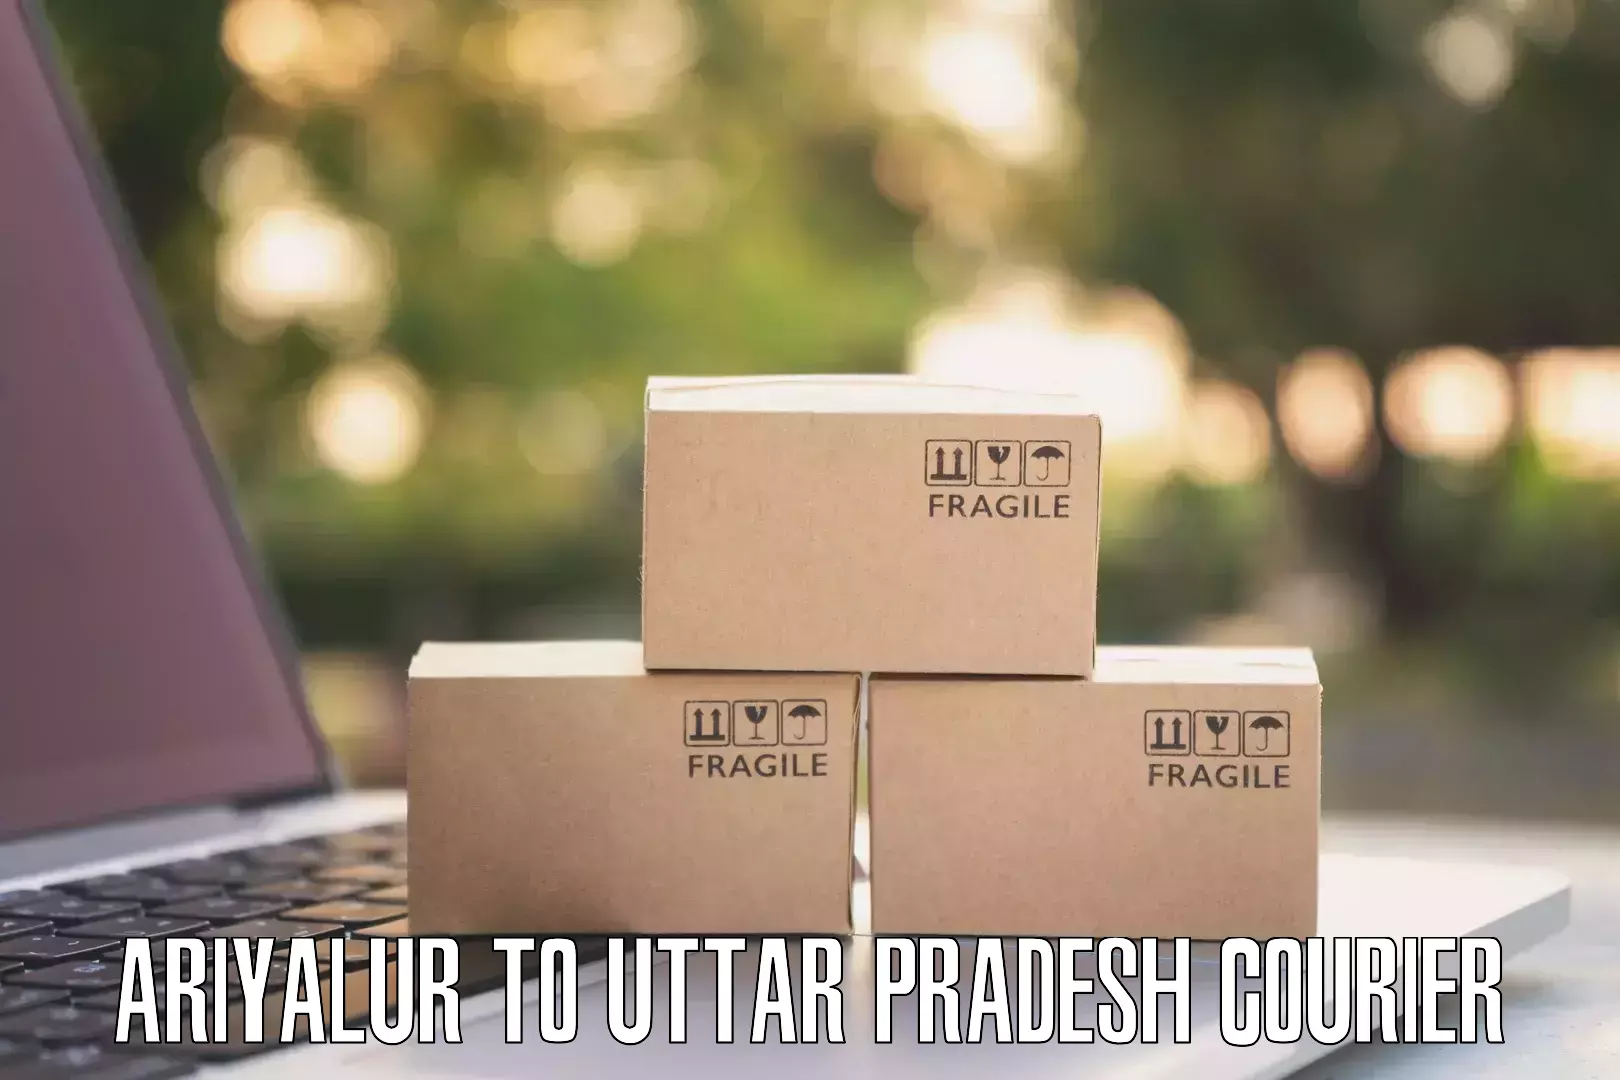 Cash on delivery service Ariyalur to Utraula